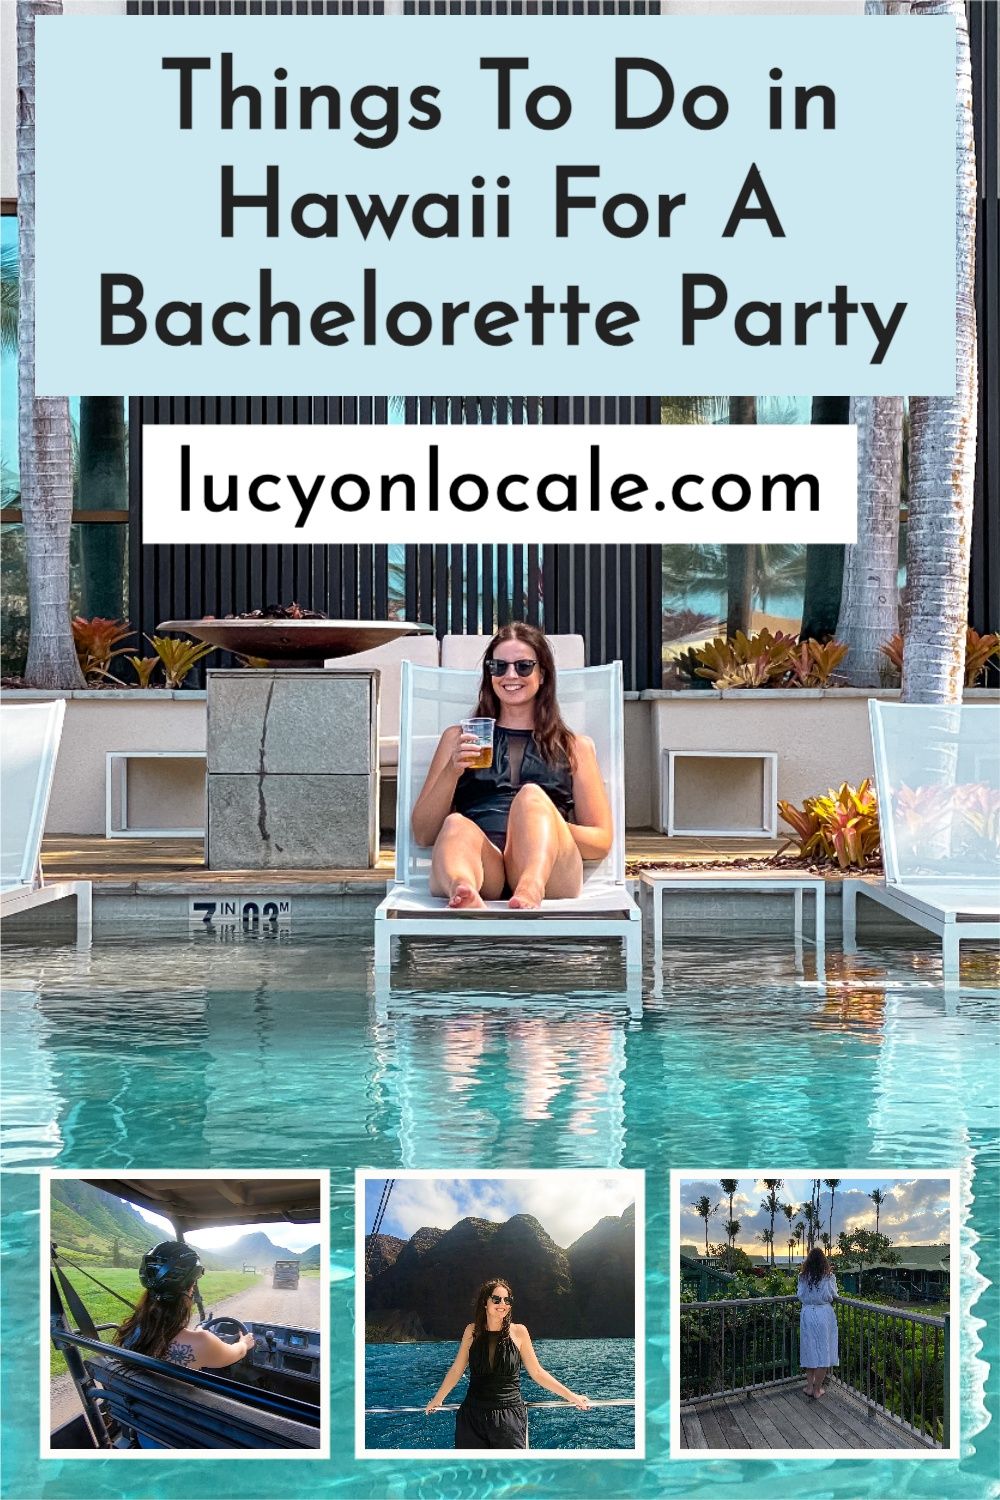 Things To Do in Hawaii for a Bachelorette Party